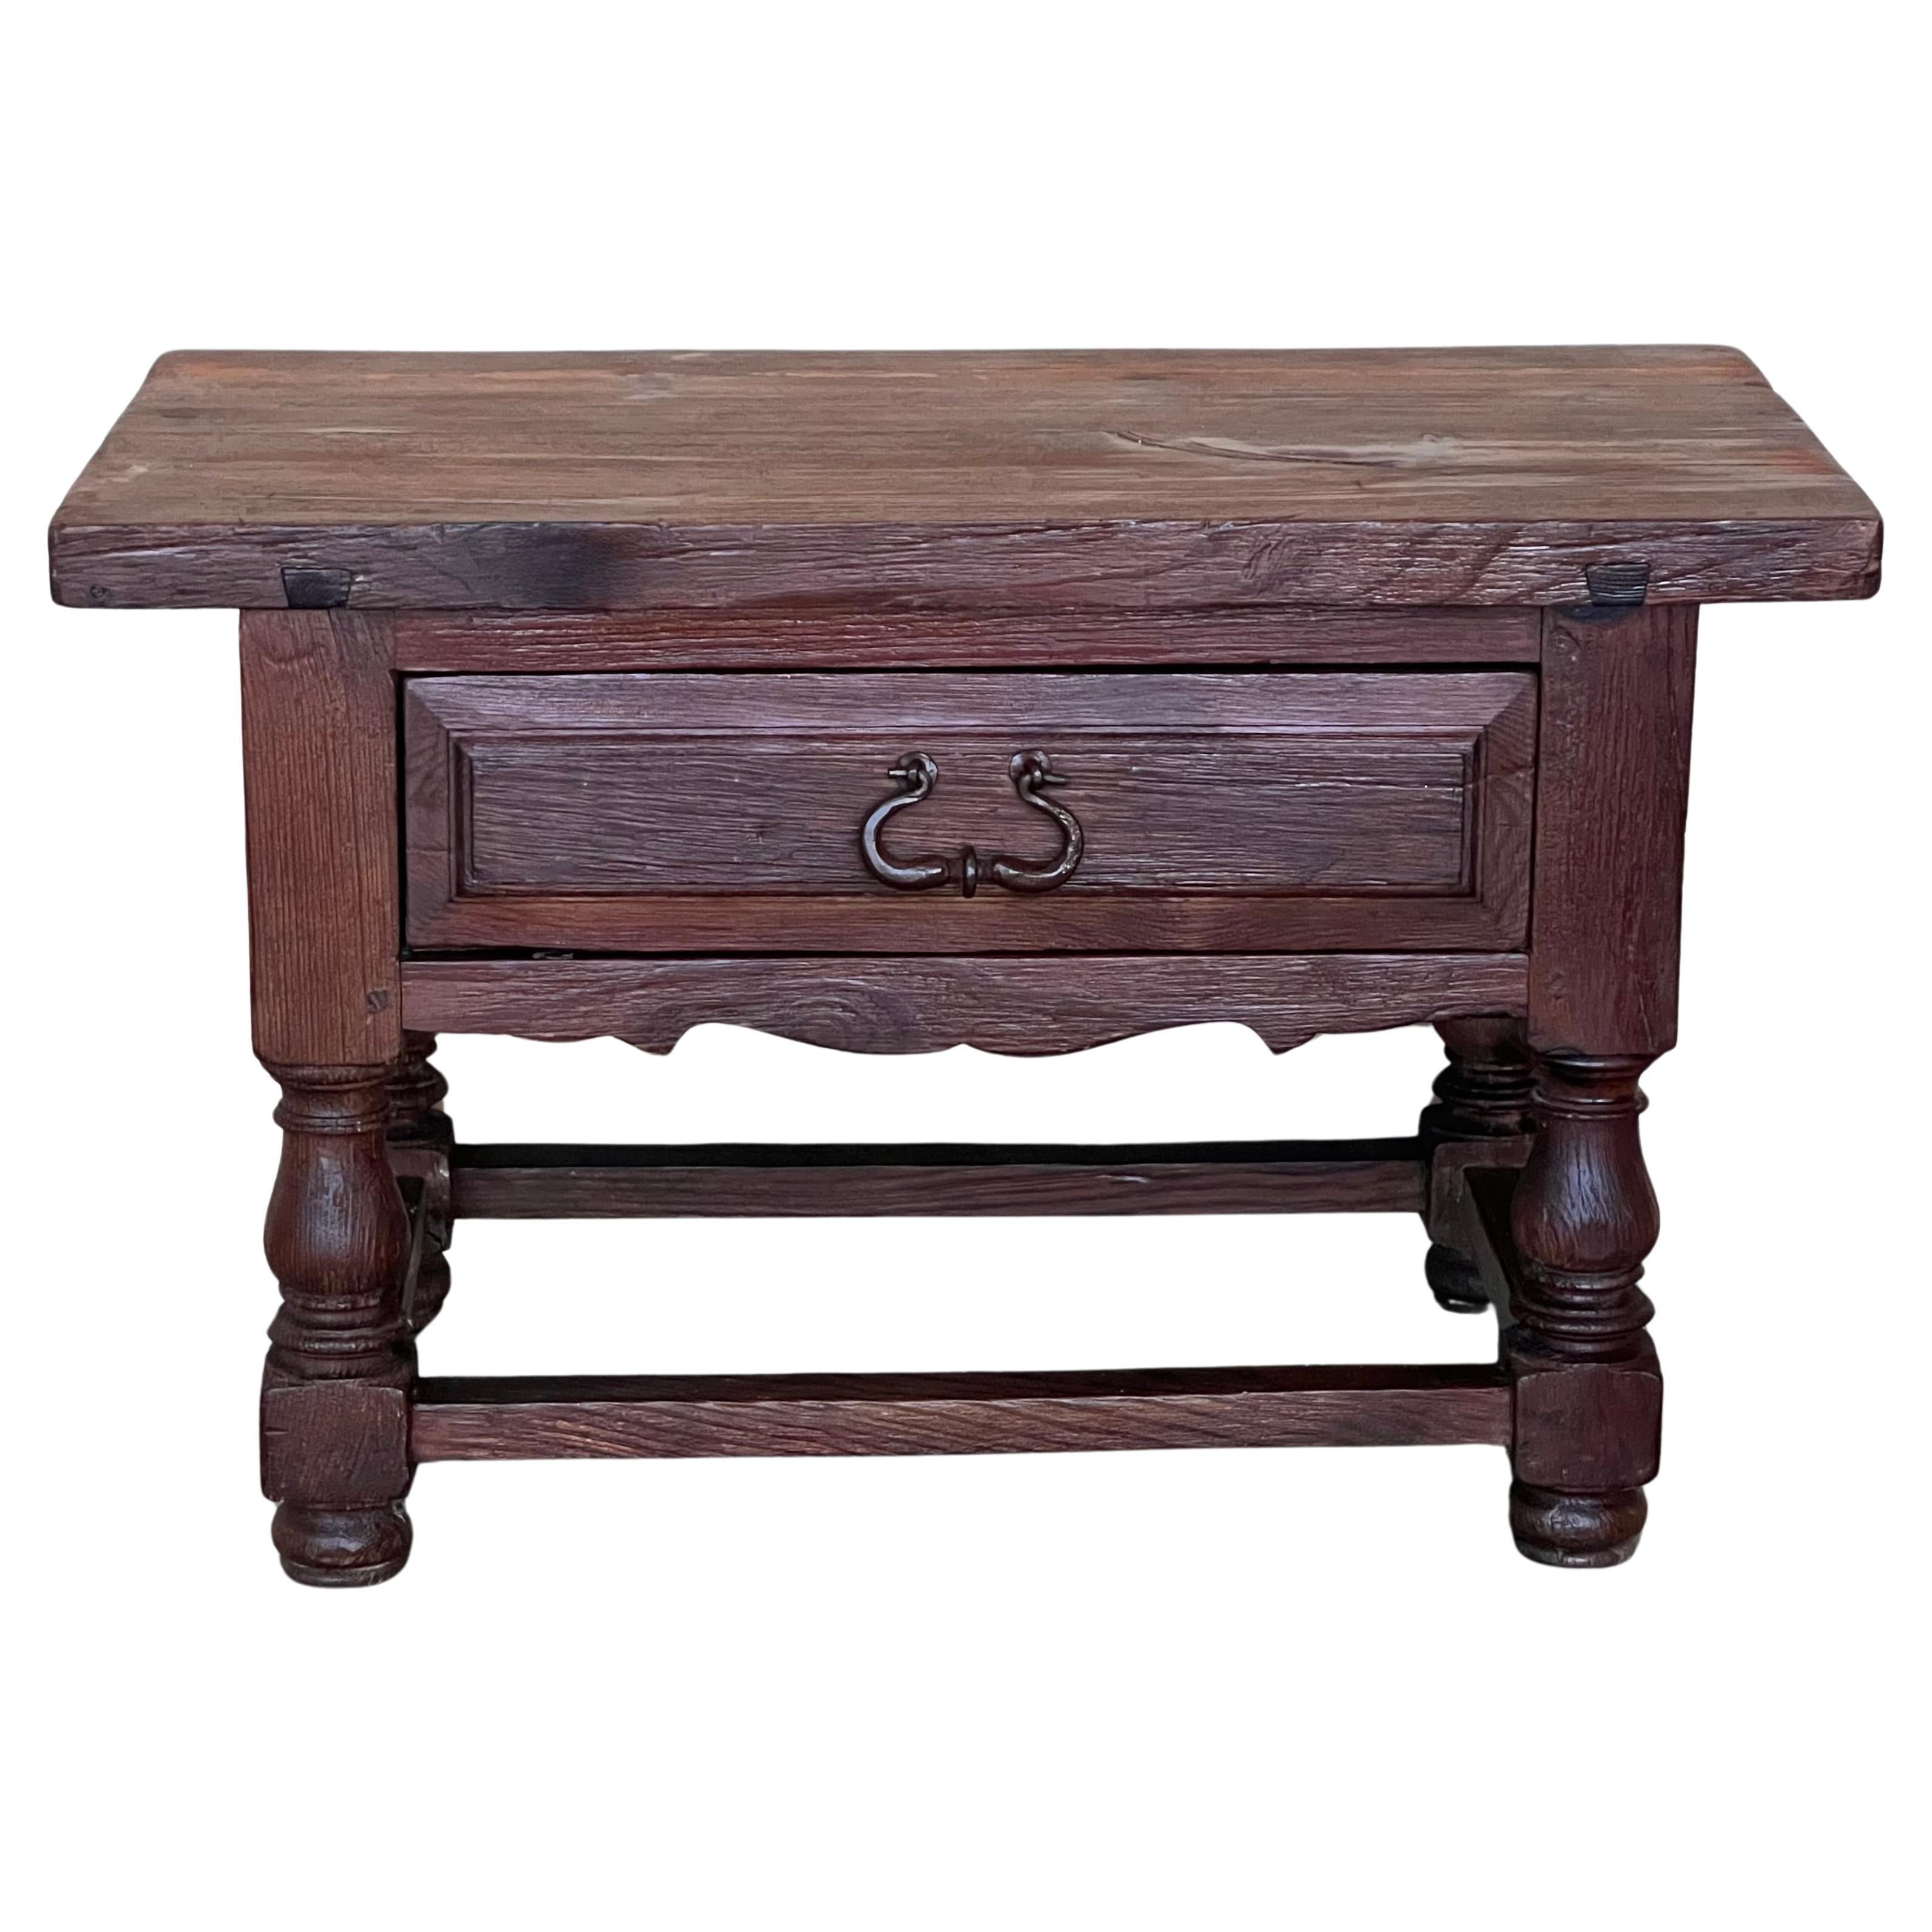 Late 19th Century Rustic Artisan Made Pyrenees Mountains Side Table End Table For Sale